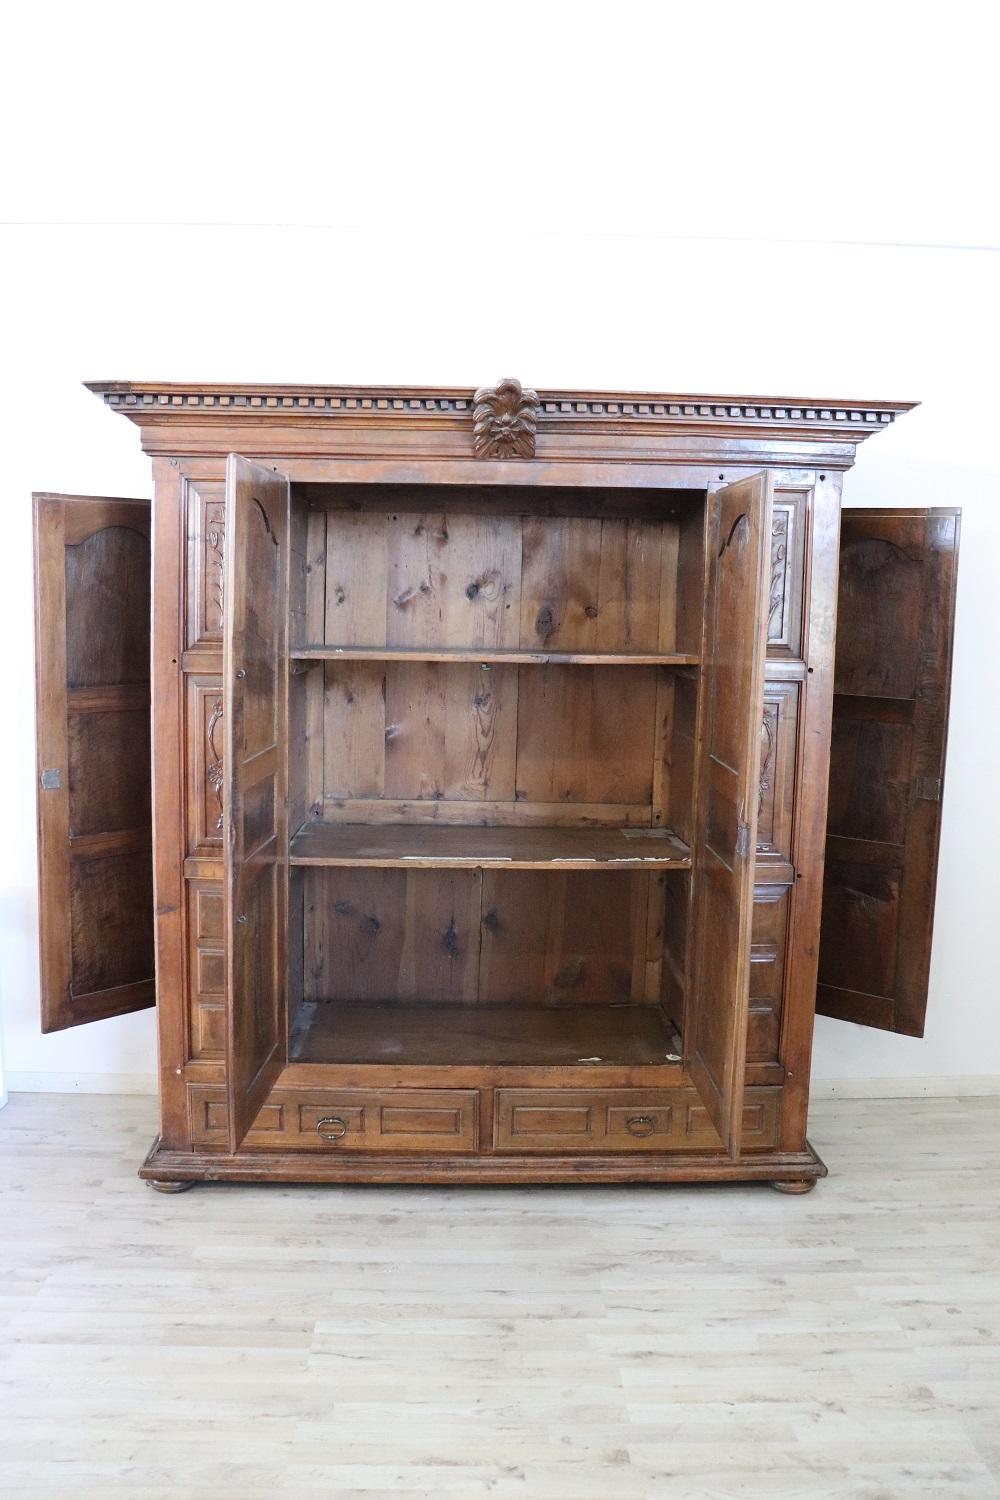 Hand-Carved Early 18th Century Baroque Carved Walnut Antique Wardrobe, Cabinet with Secrets